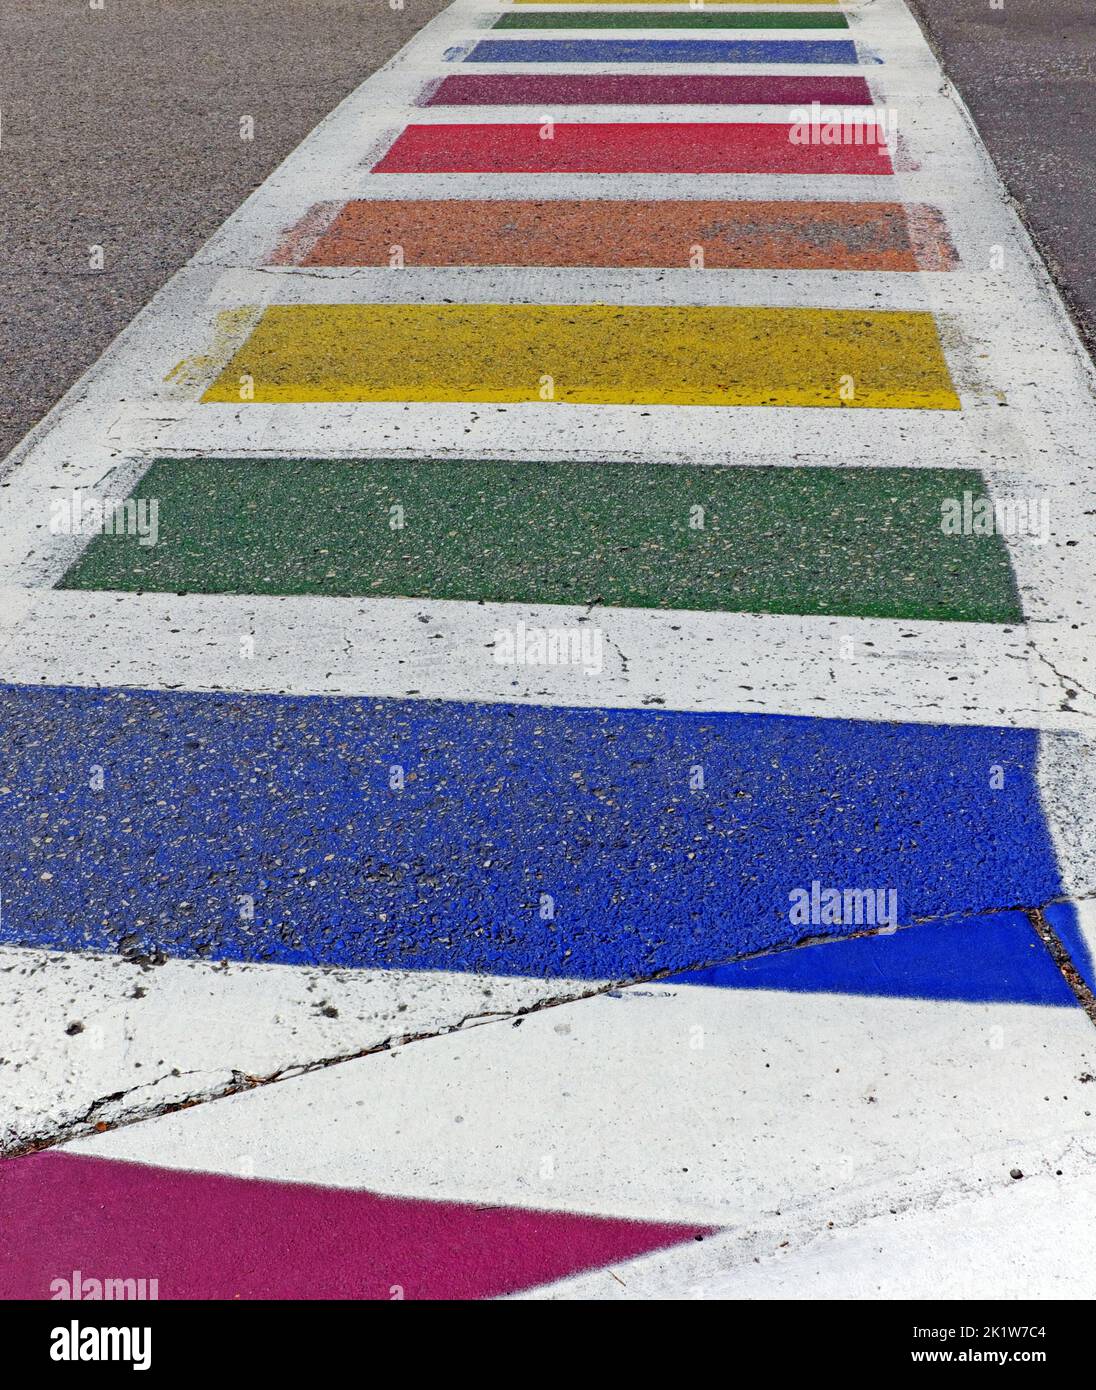 A rainbow painted crosswalk in the LGBTQ friendly midwest town of Douglas, Michigan, USA. Stock Photo